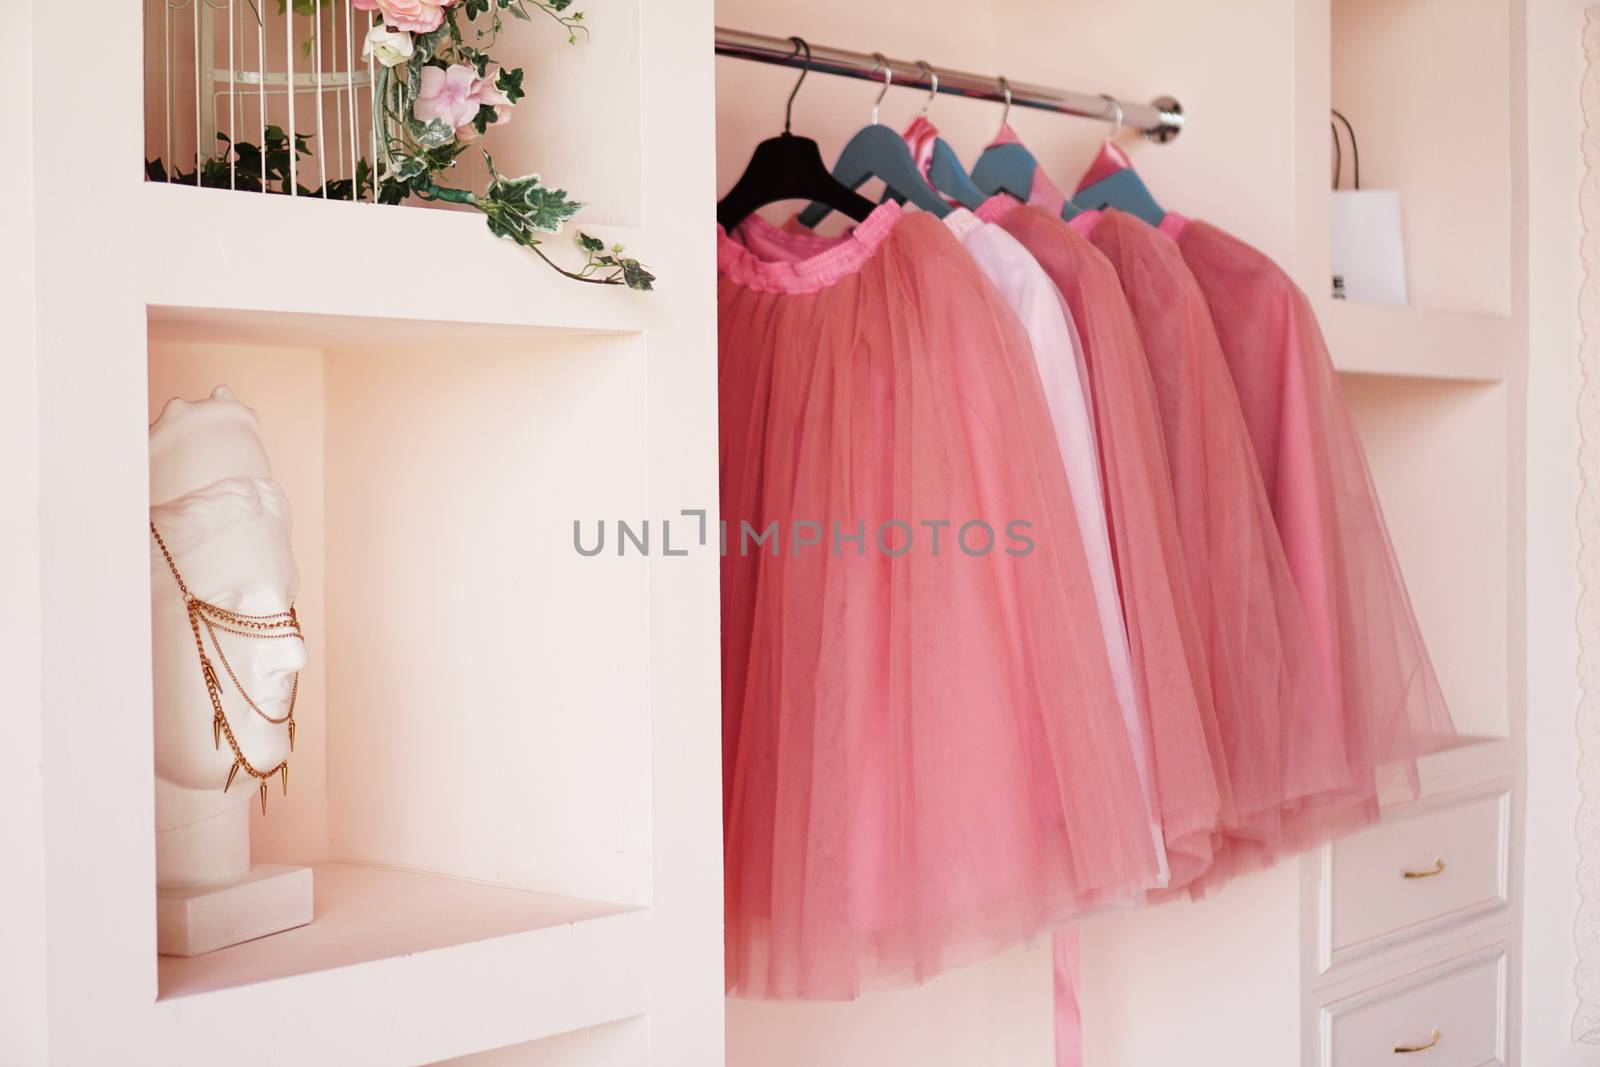 Dressing closet with pink clothes on hanger. The wardrobe is full of pink skirts by natali_brill